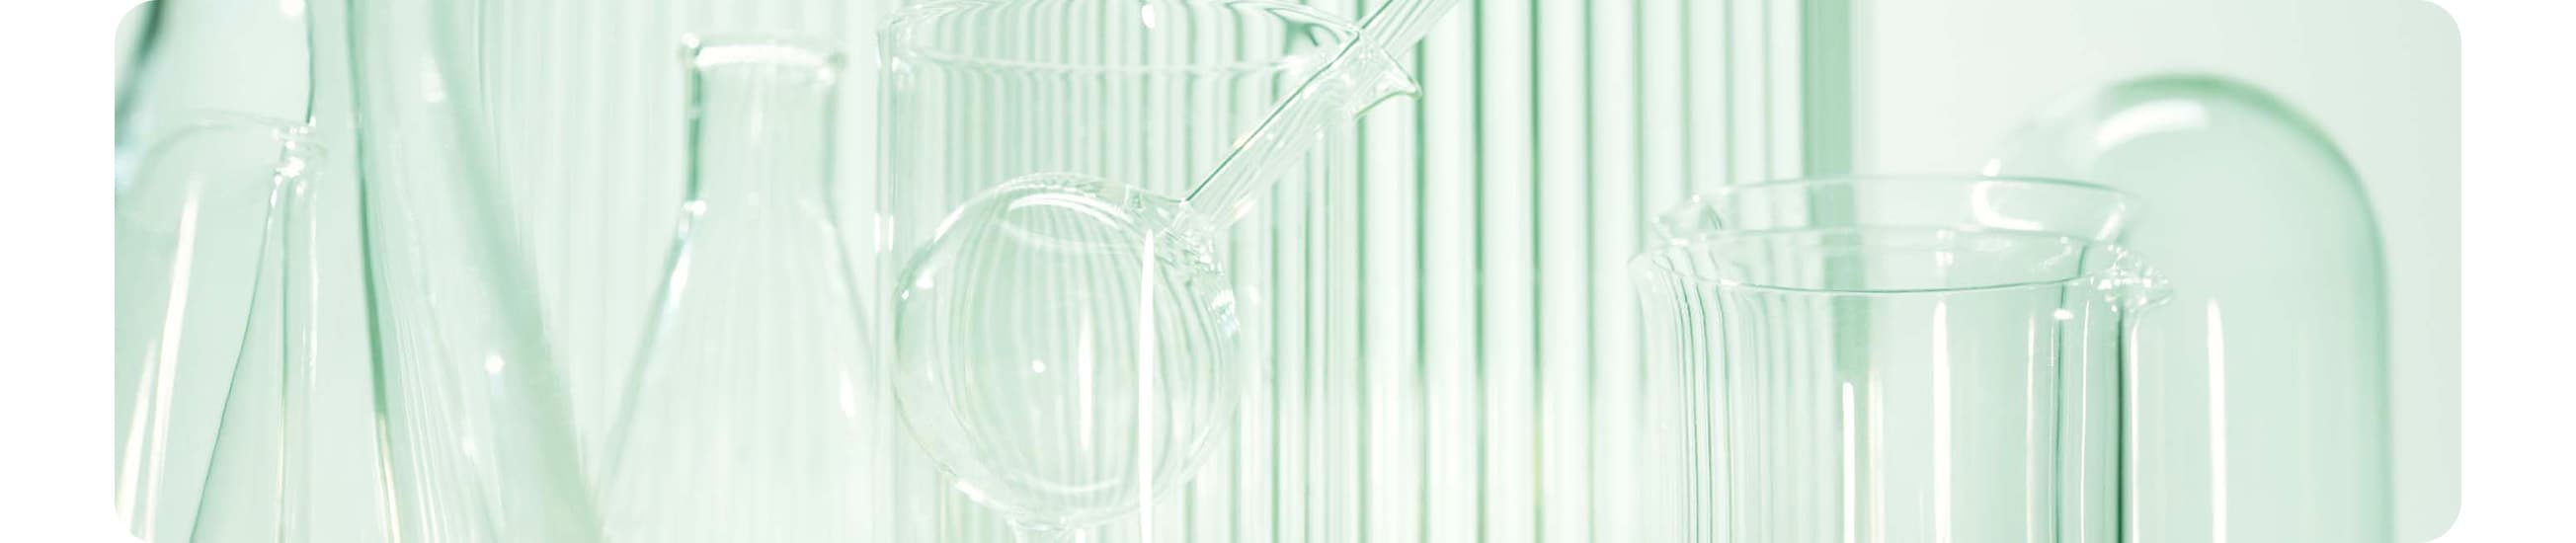 Background image containing selection of dermatologist glass vials in different shapes